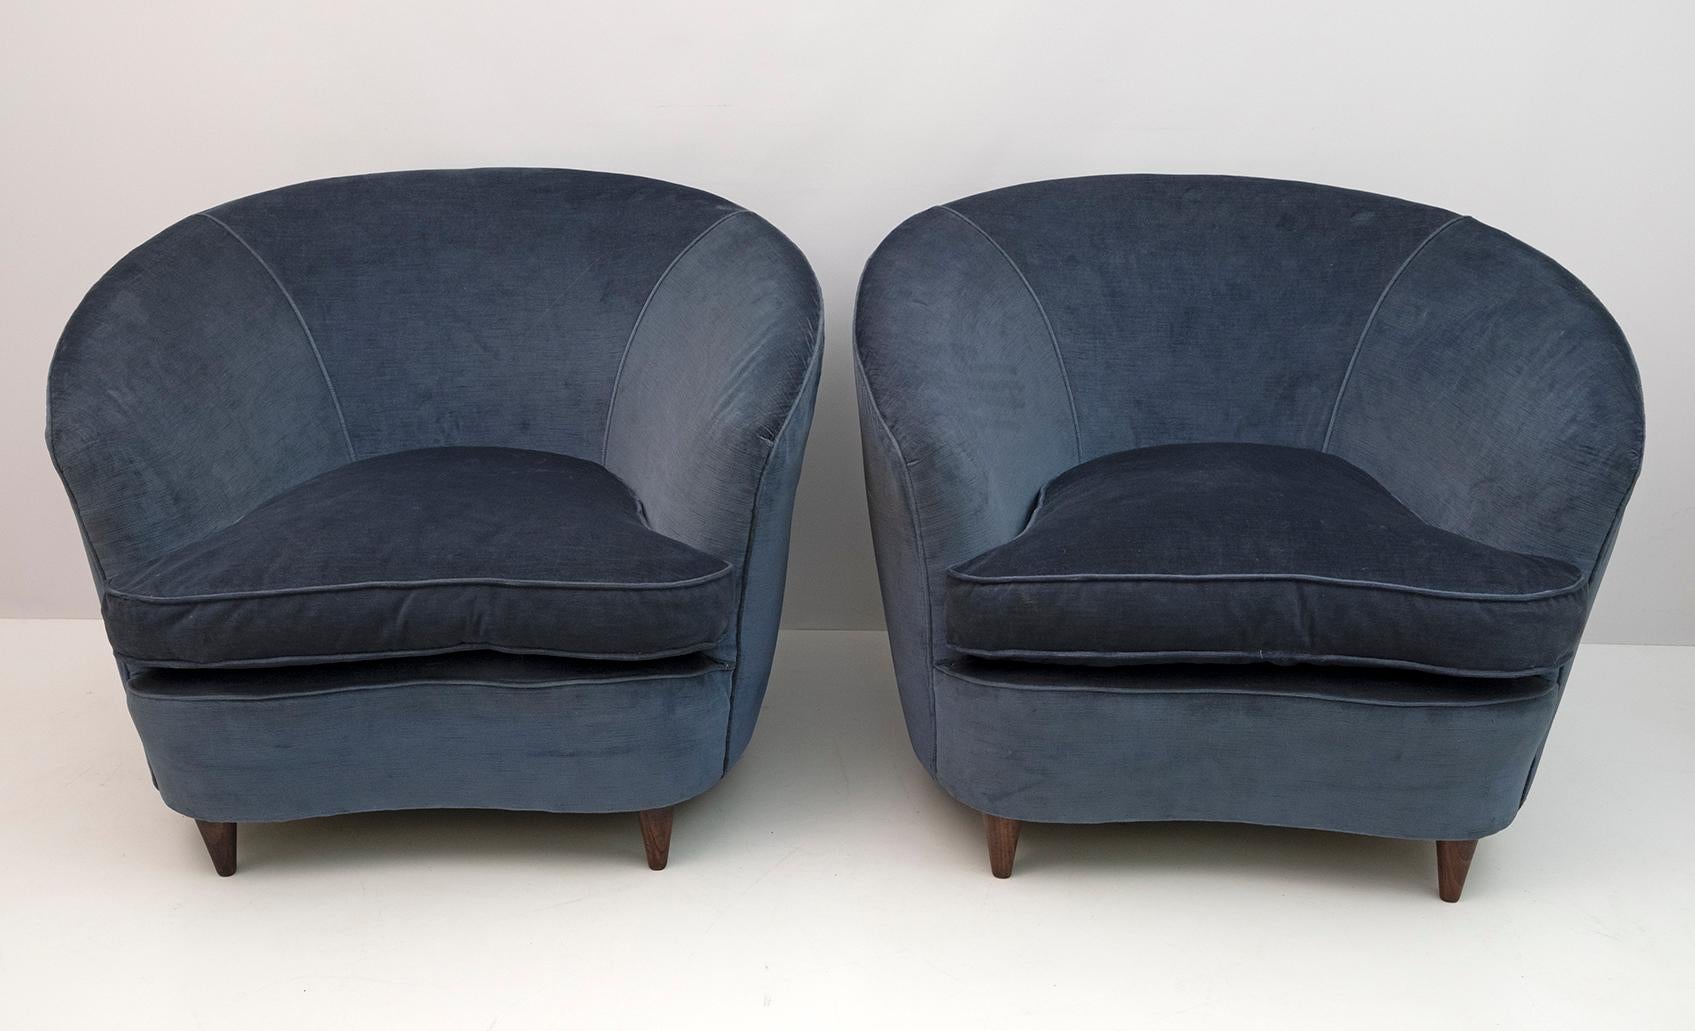 Rare pair of Gio Ponti curved armchairs for Home and Garden from the 1950s.
The armchairs were reupholstered more than twenty years ago, but the velvet is worn and I recommend a new upholstery.

Sofa also available.
The sofa measures cm:
H 76 x